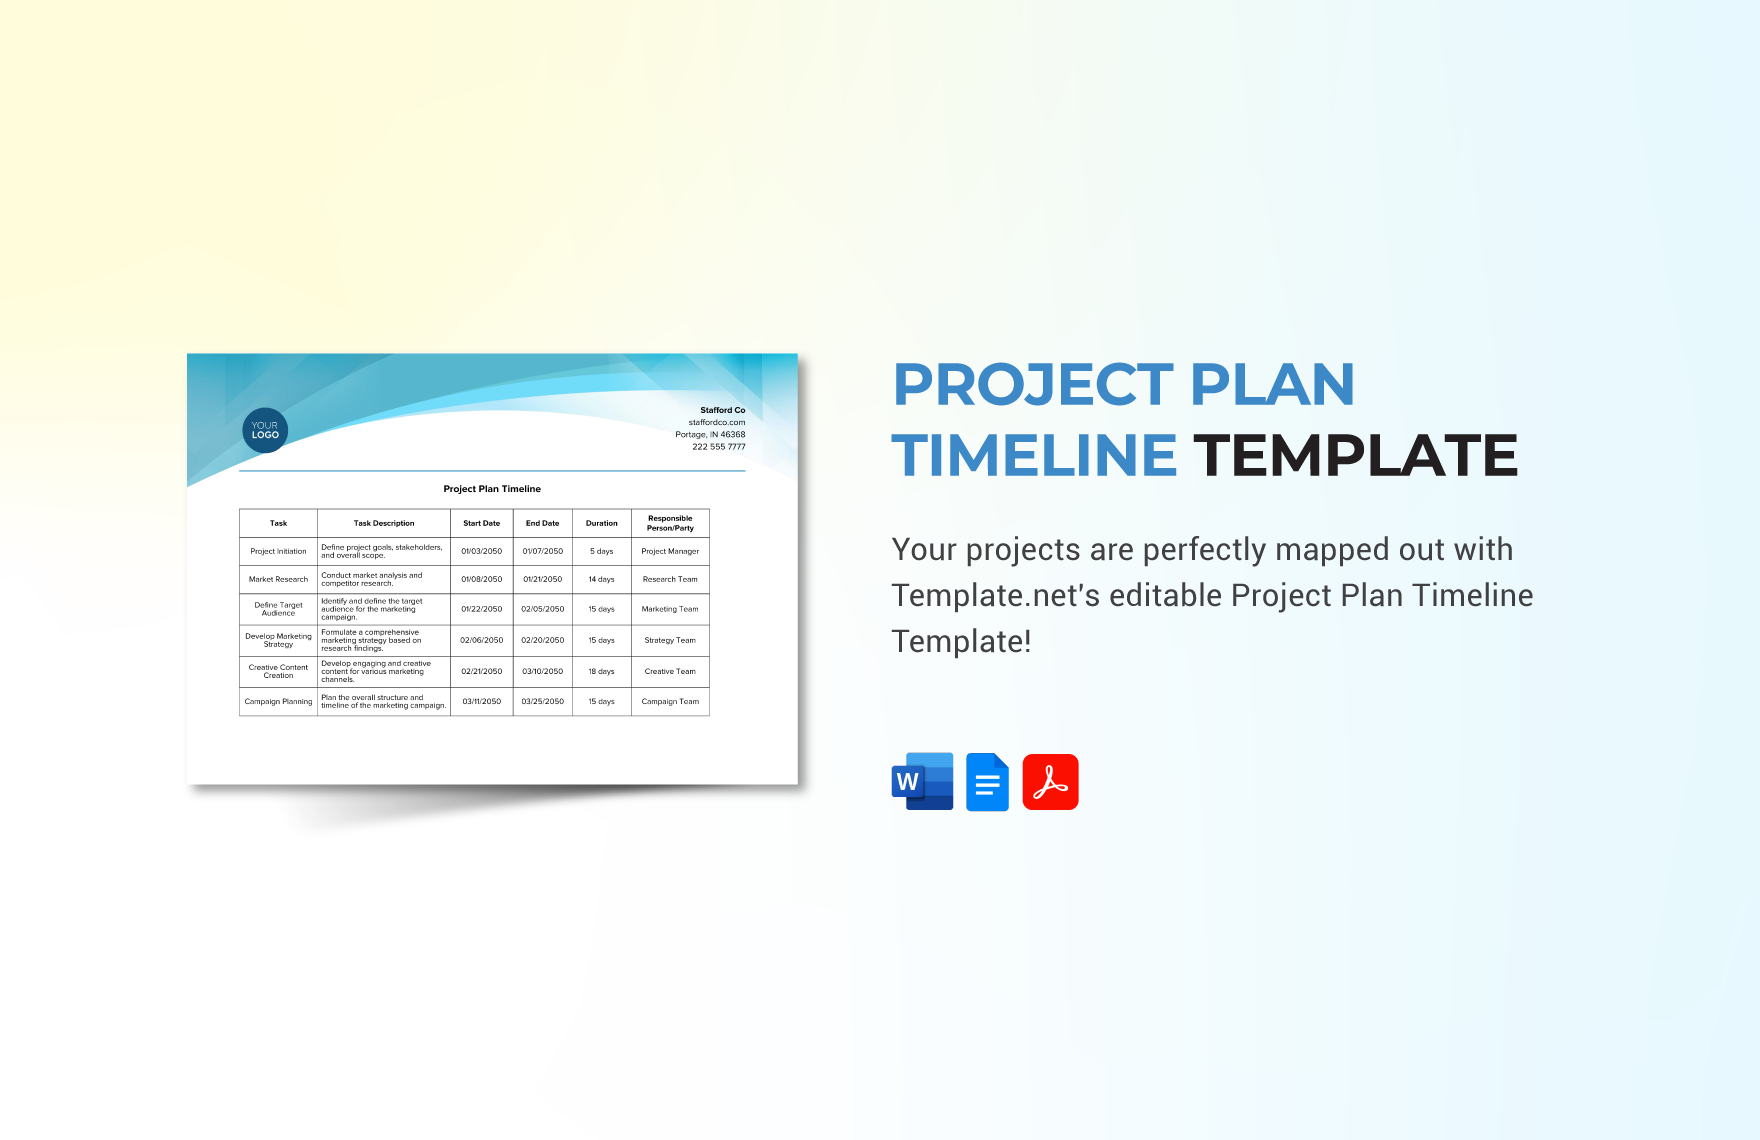 Project Plan Timeline Template in Word, Google Docs, PDF